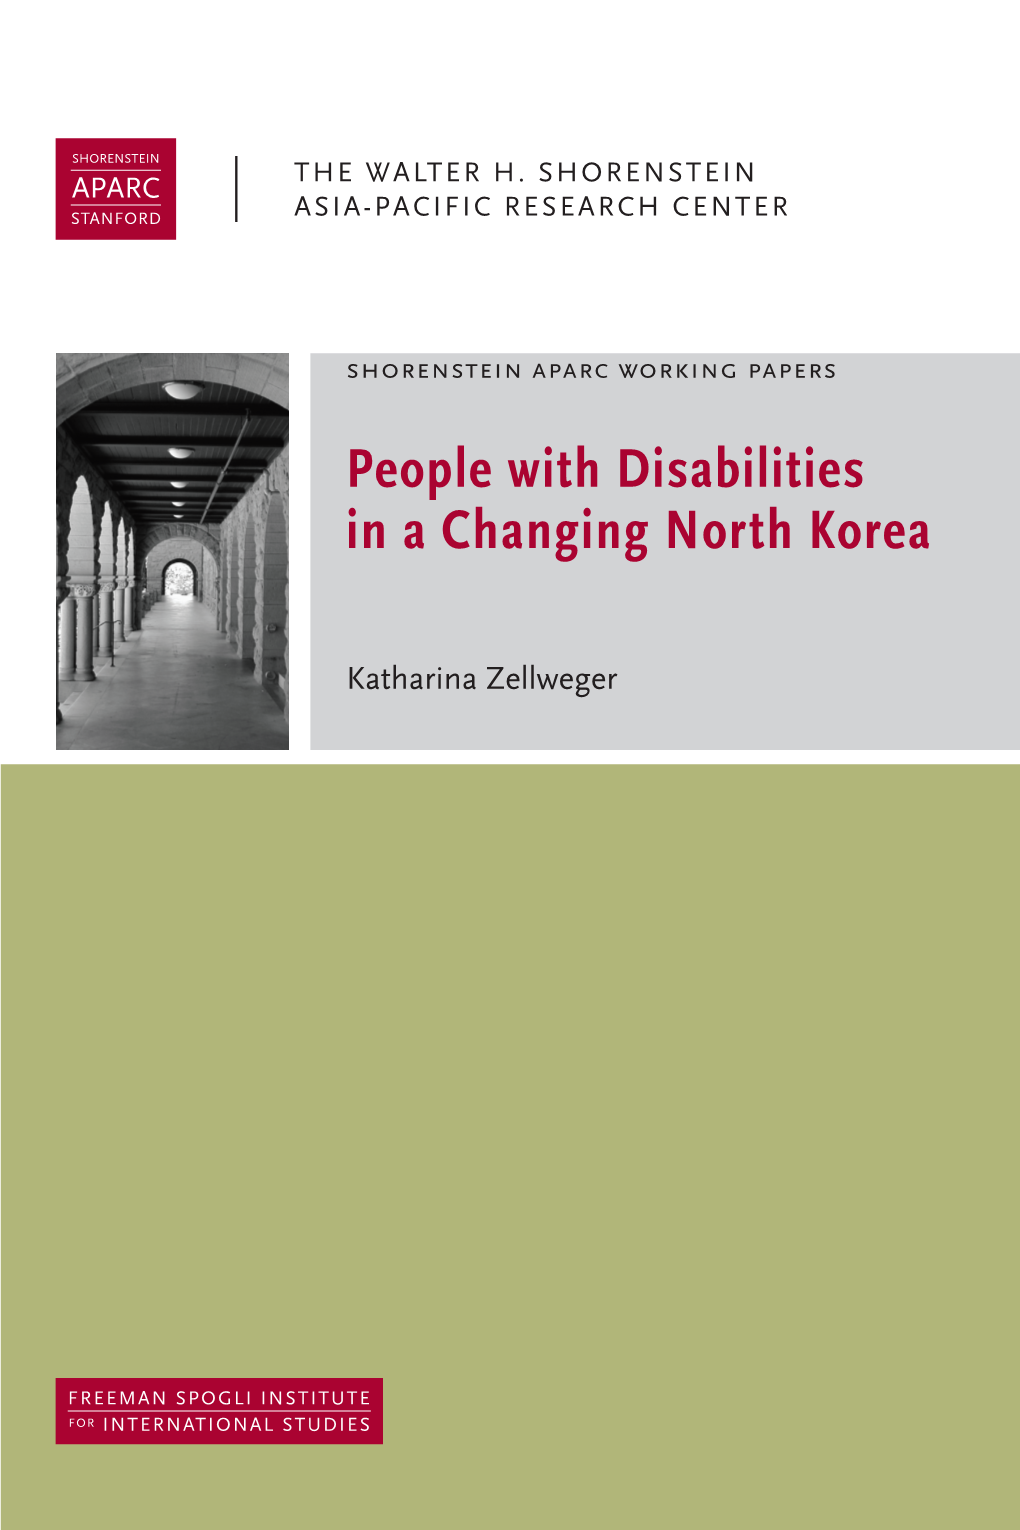 People with Disabilities in a Changing North Korea